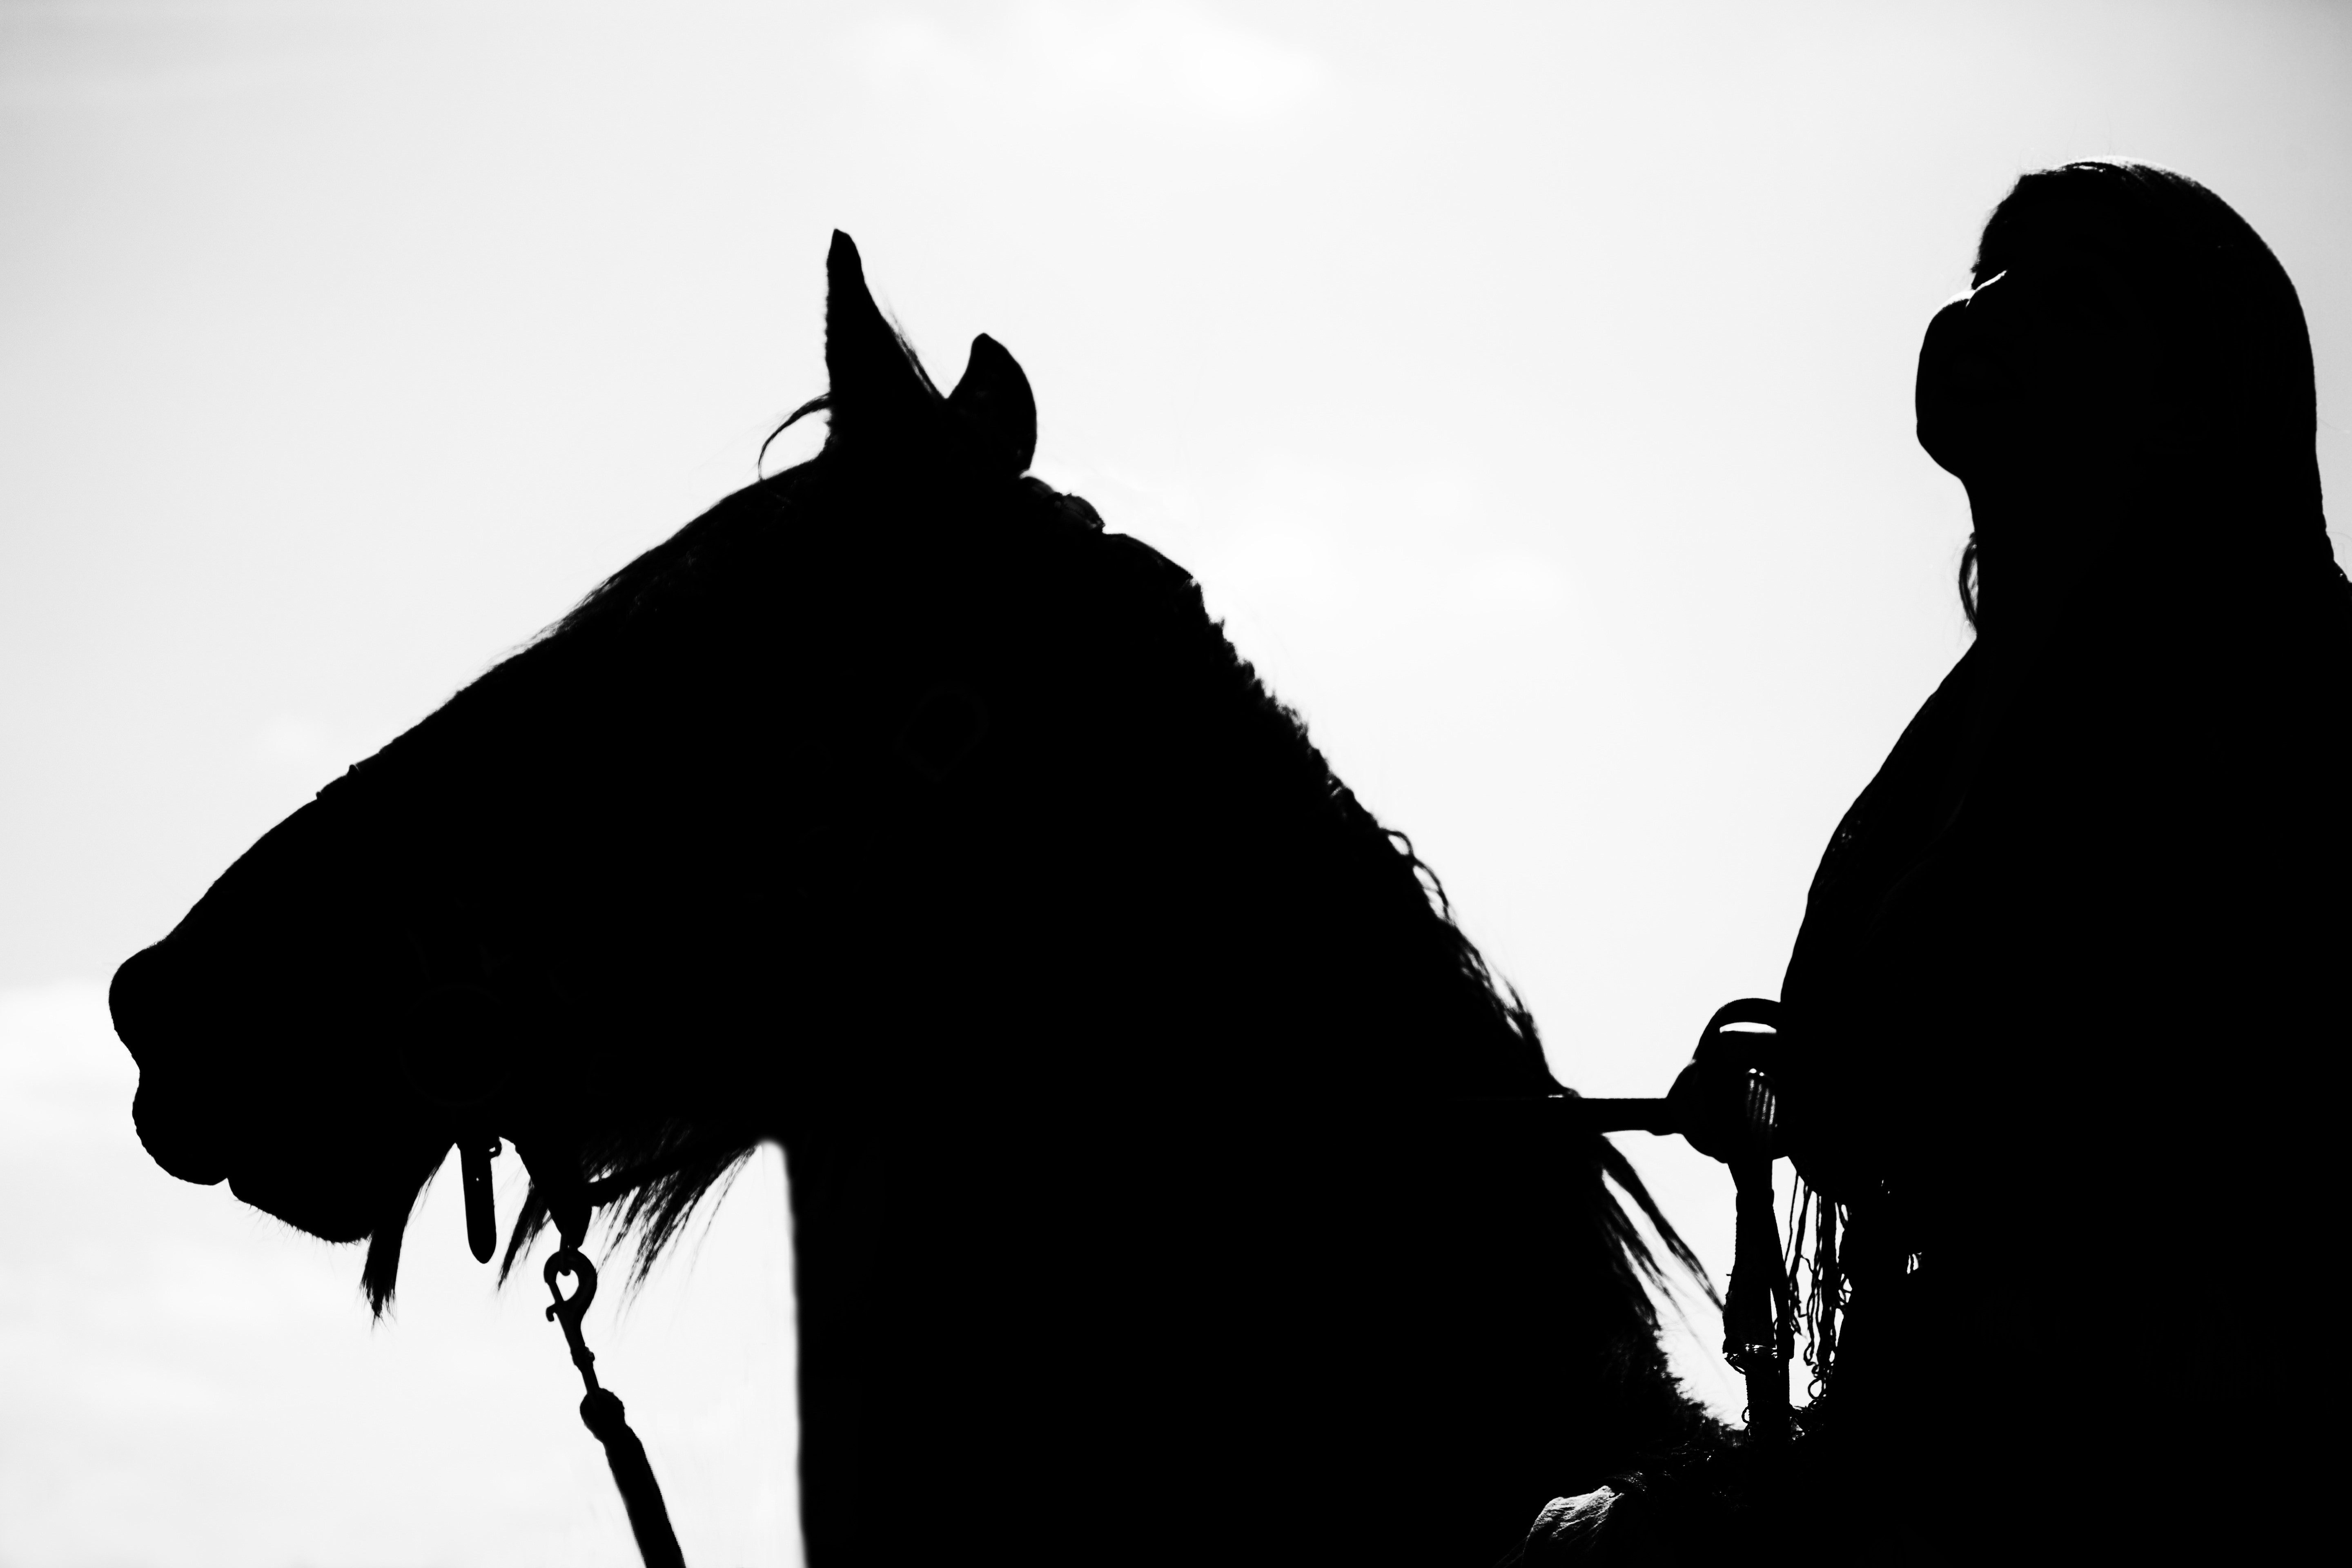 Horse Show, Horse, Show, Equestrian, silhouette, one animal